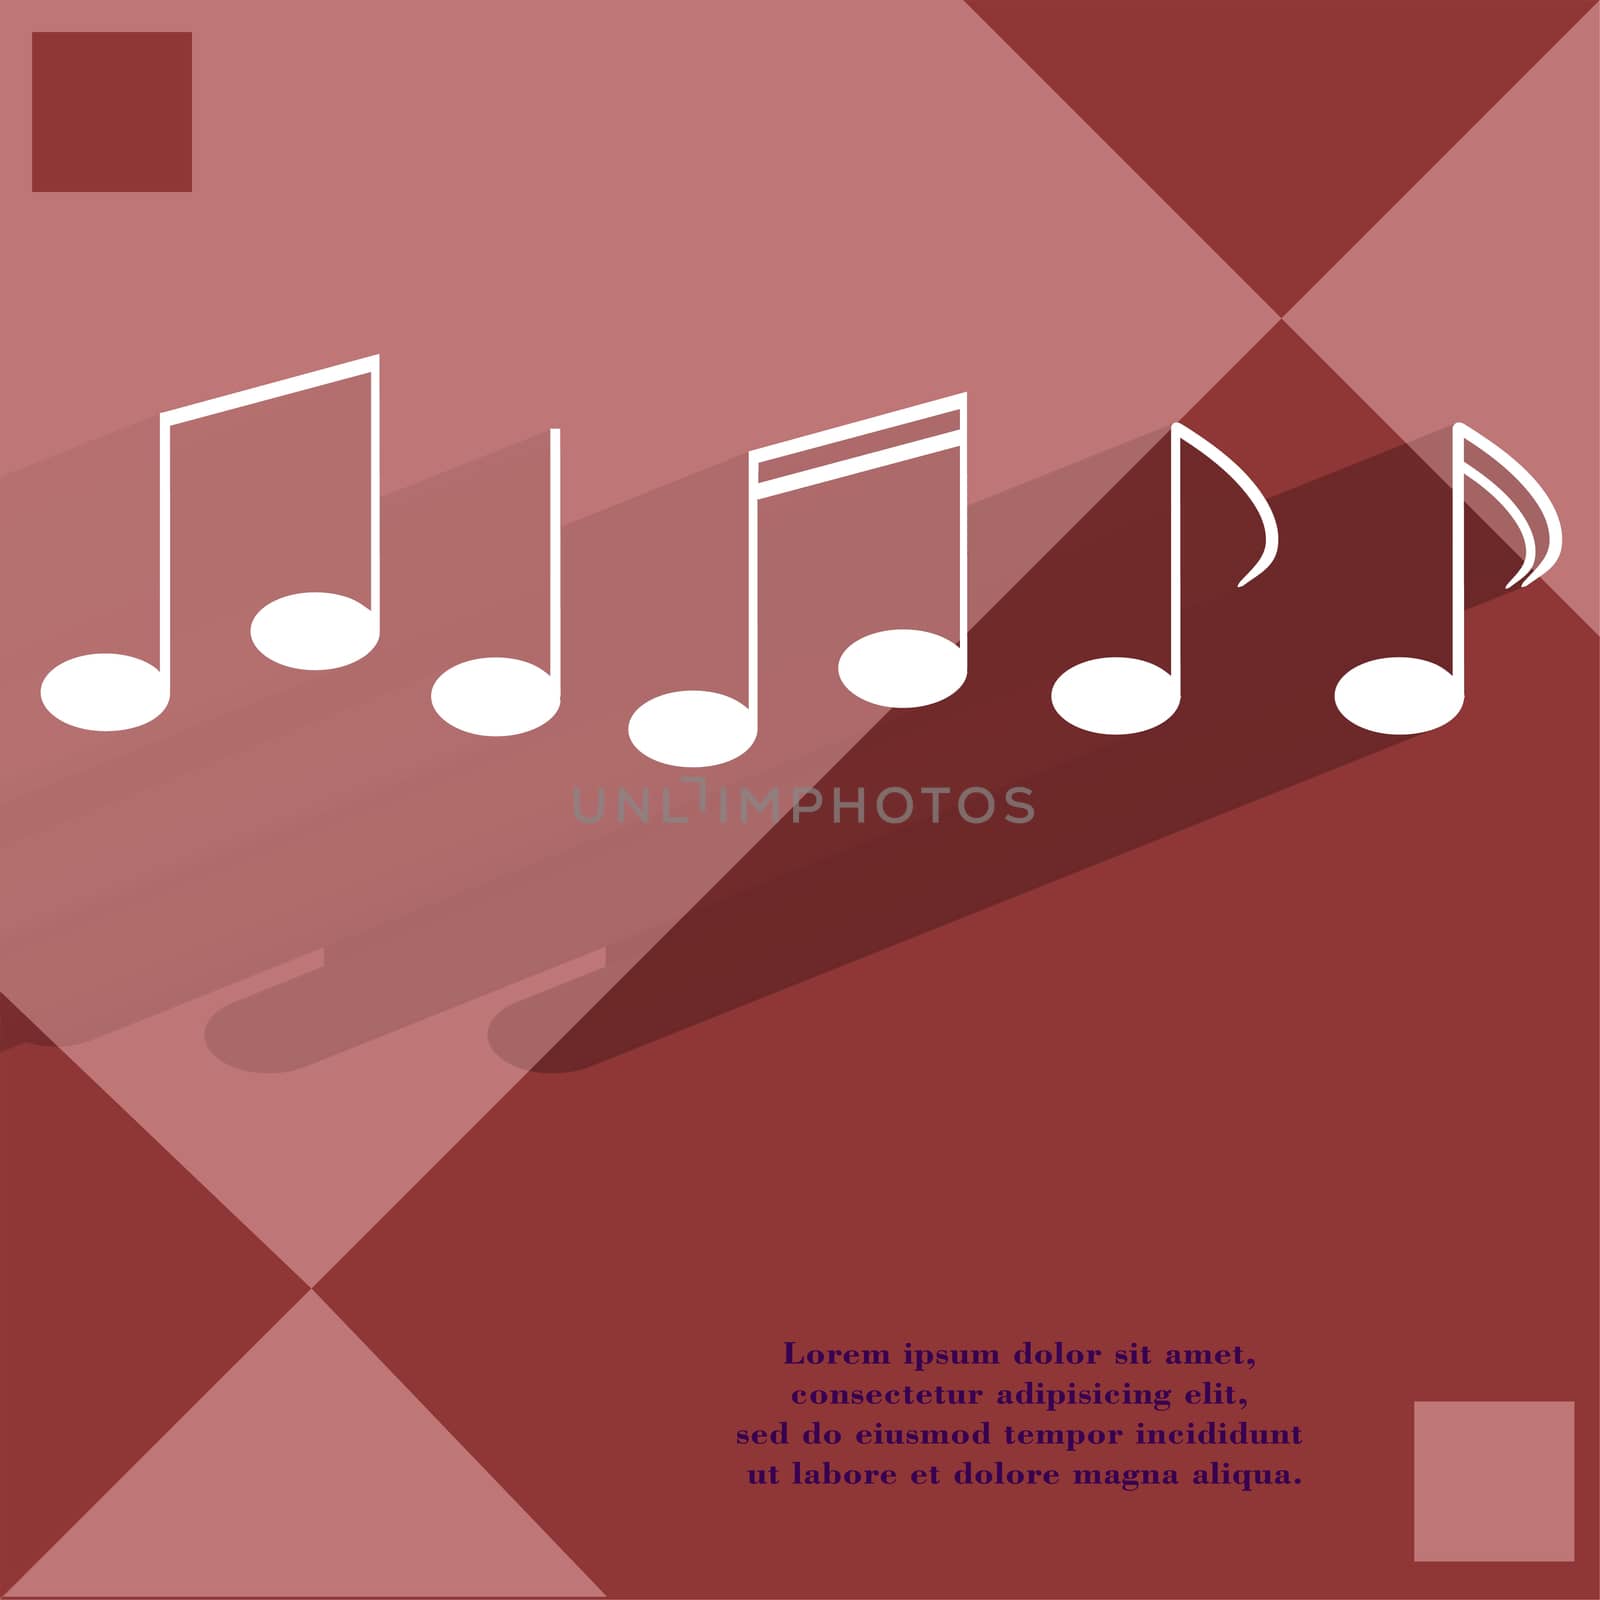 Music elements notes web icon on a flat geometric abstract background   illustration. 